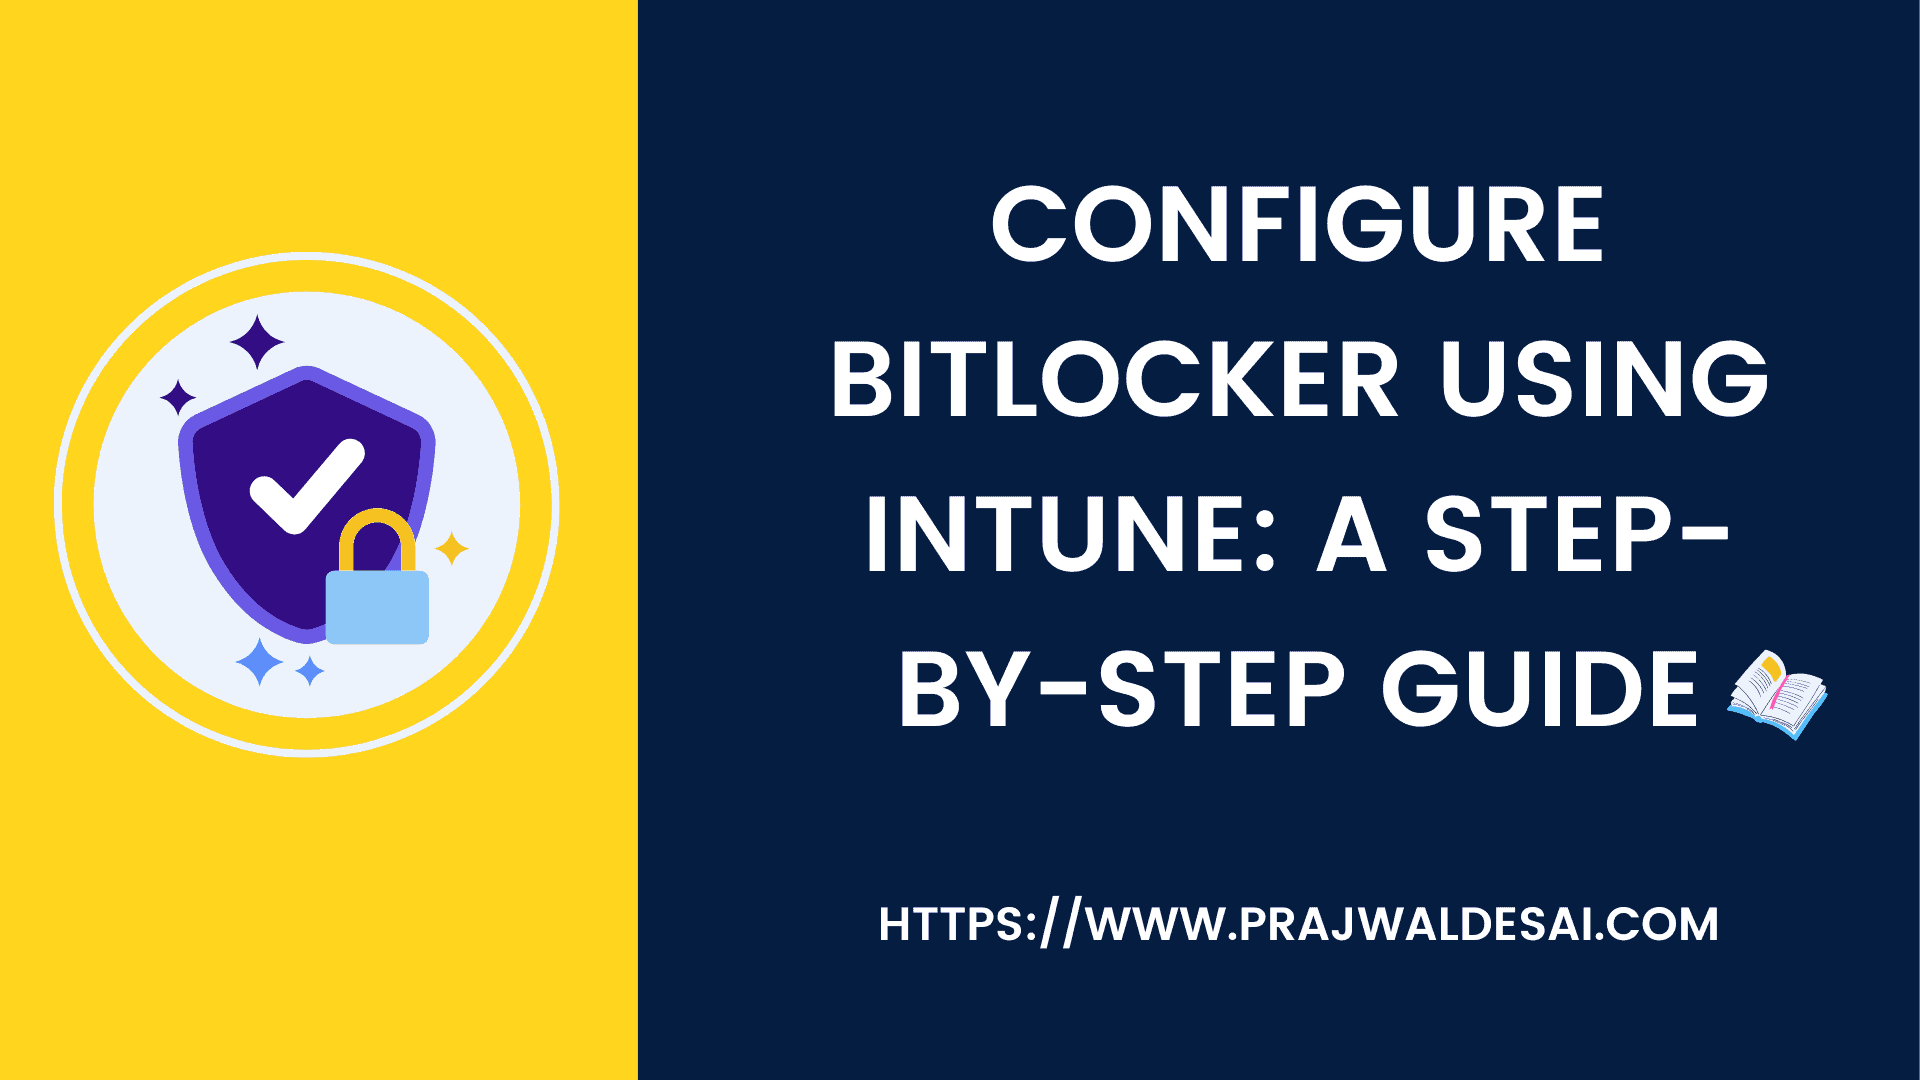 Enable and Configure Bitlocker using Intune